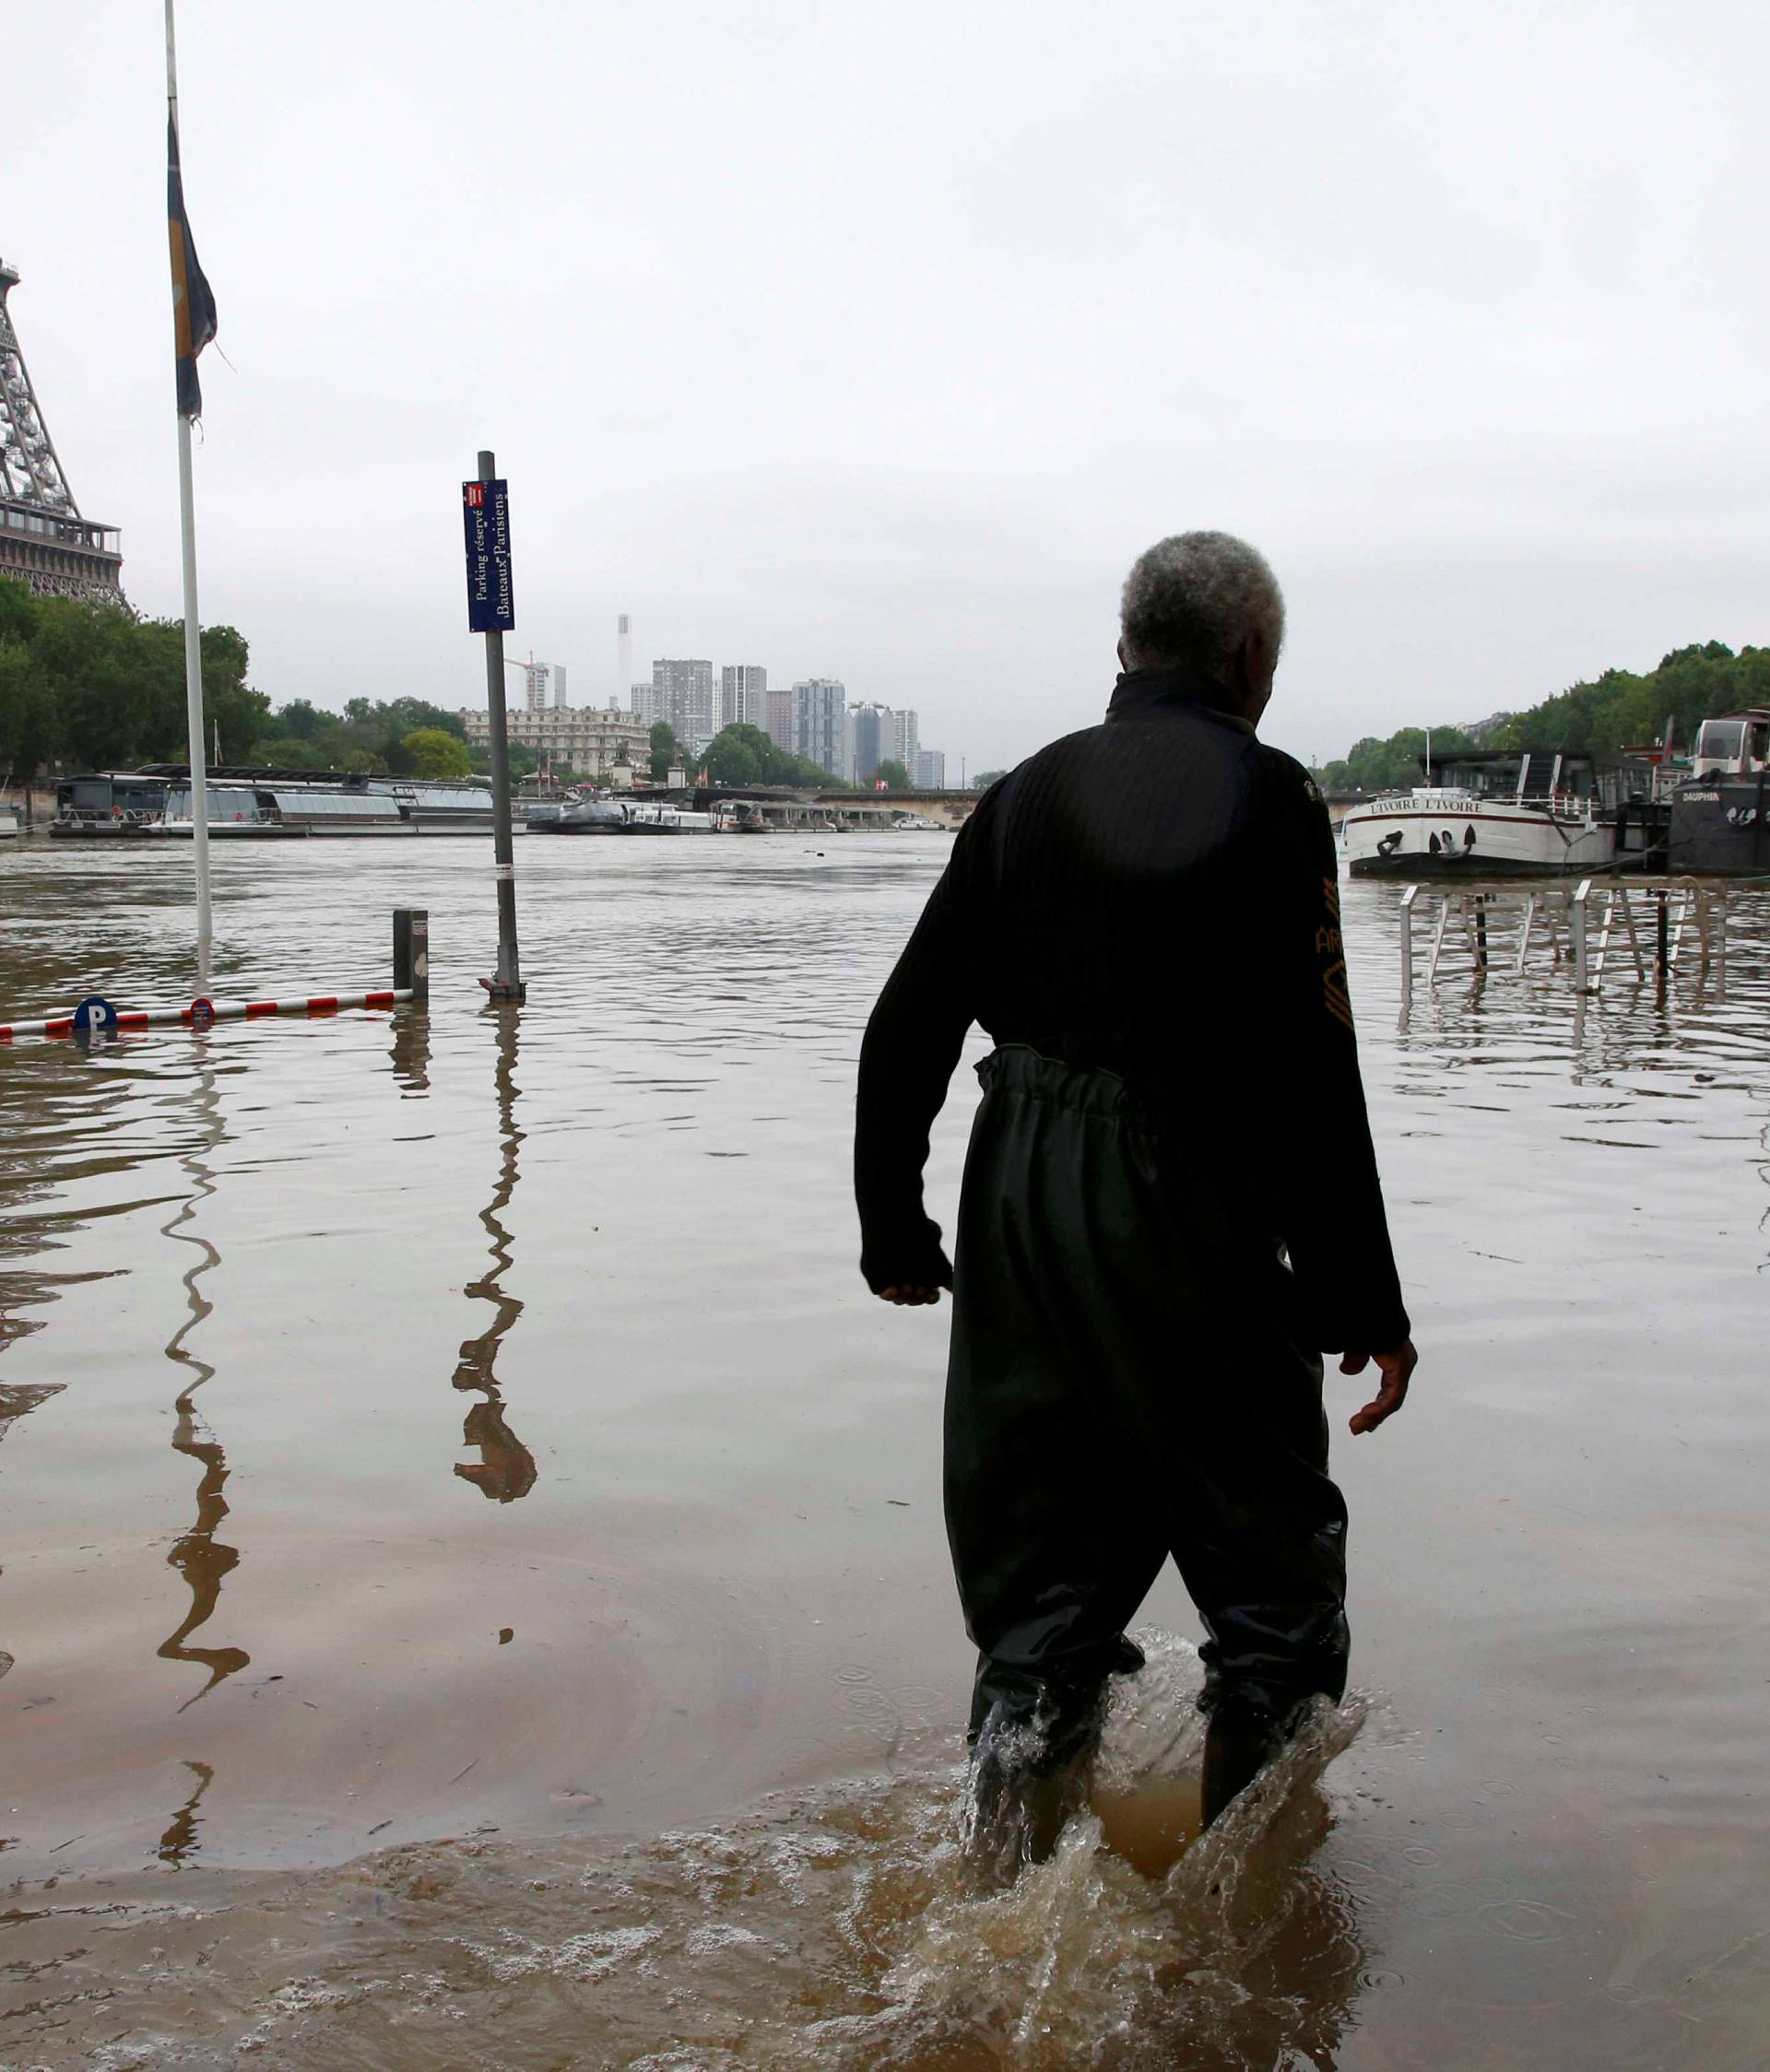 A man walks on a flooded road near his houseboat moored near the Eiffel towel during flooding on the banks of the Seine River in Paris